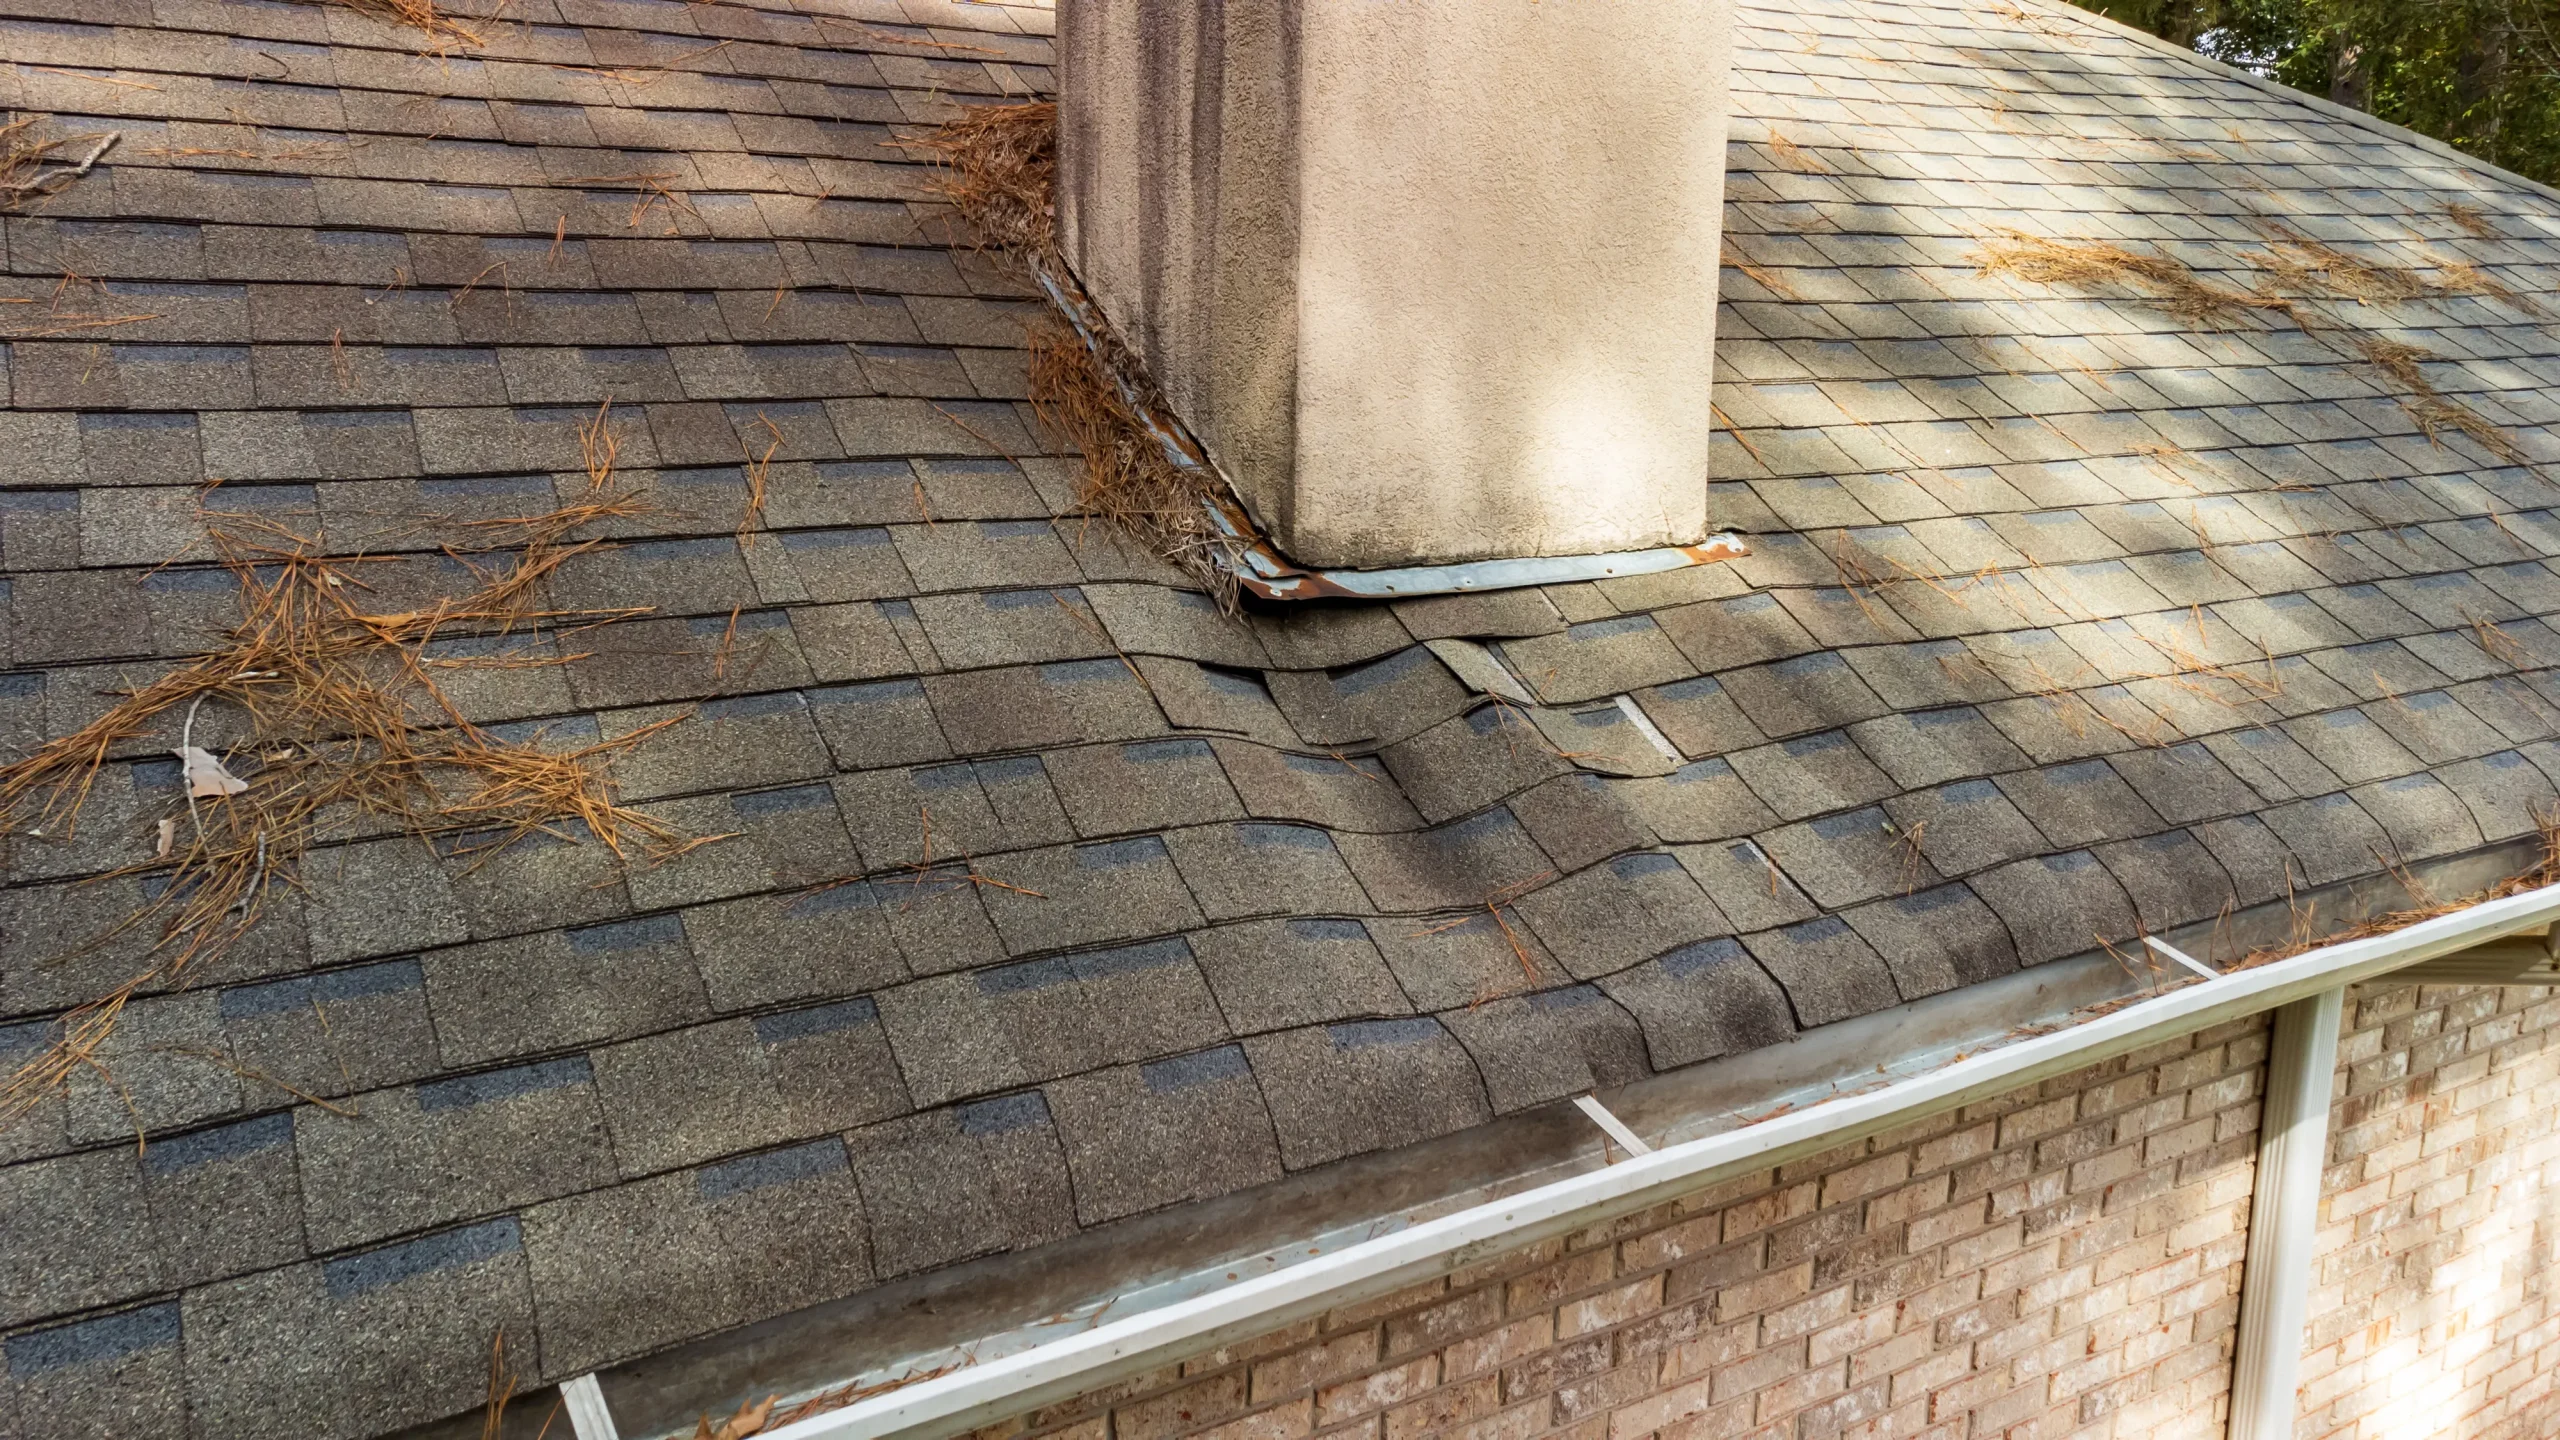 Damaged roof showing signs of water infiltration and leaking for home in Harrisburg, PA